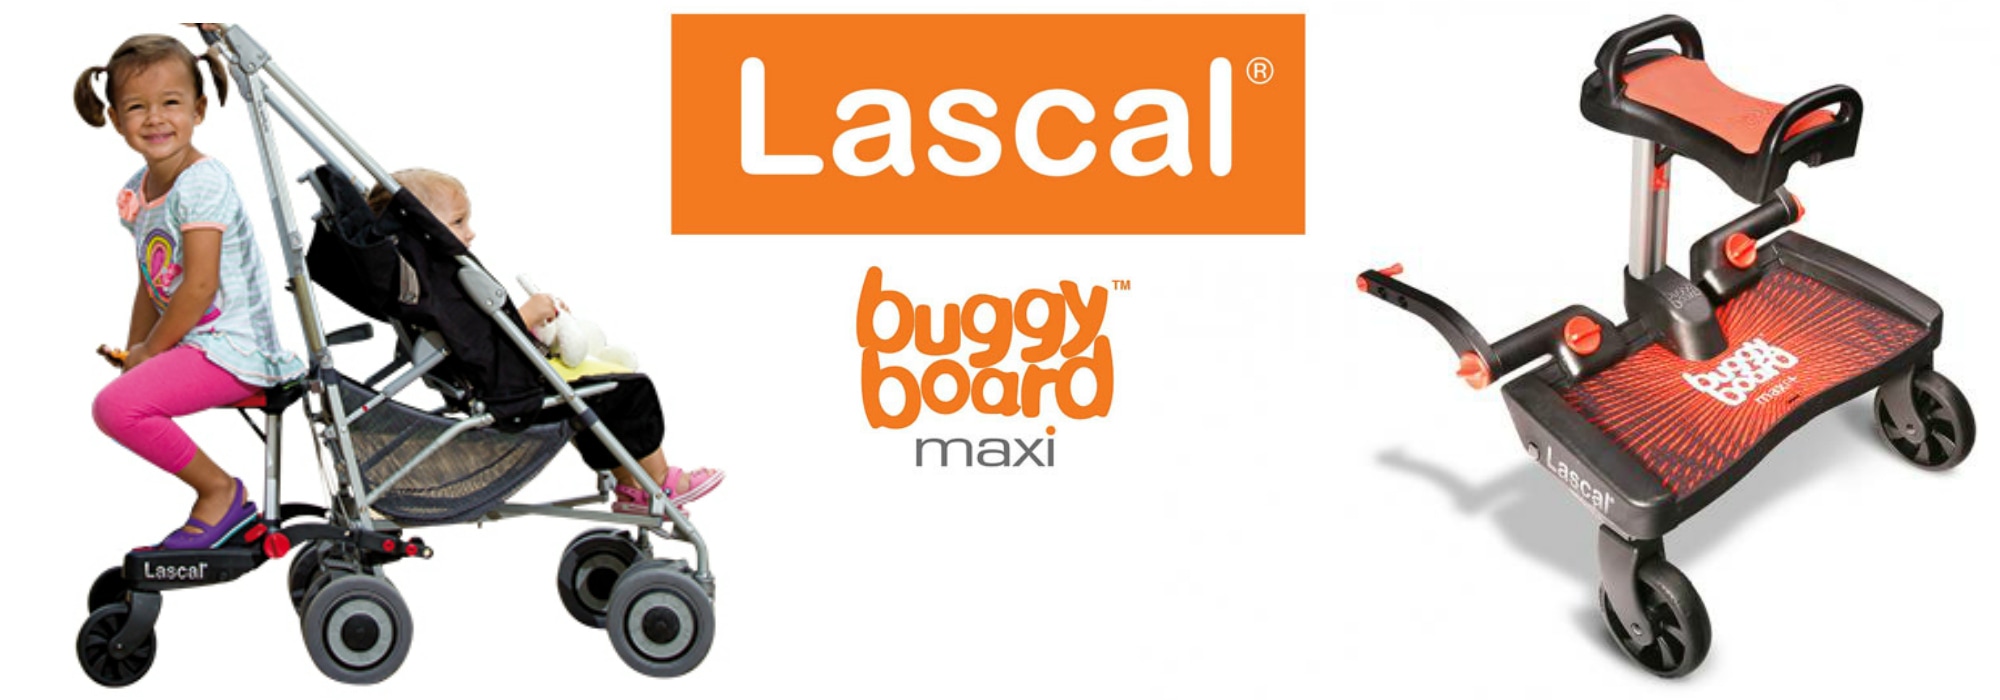 Win a Lascal BuggyBoard Maxi+ in US Japan Fam's $500 value 